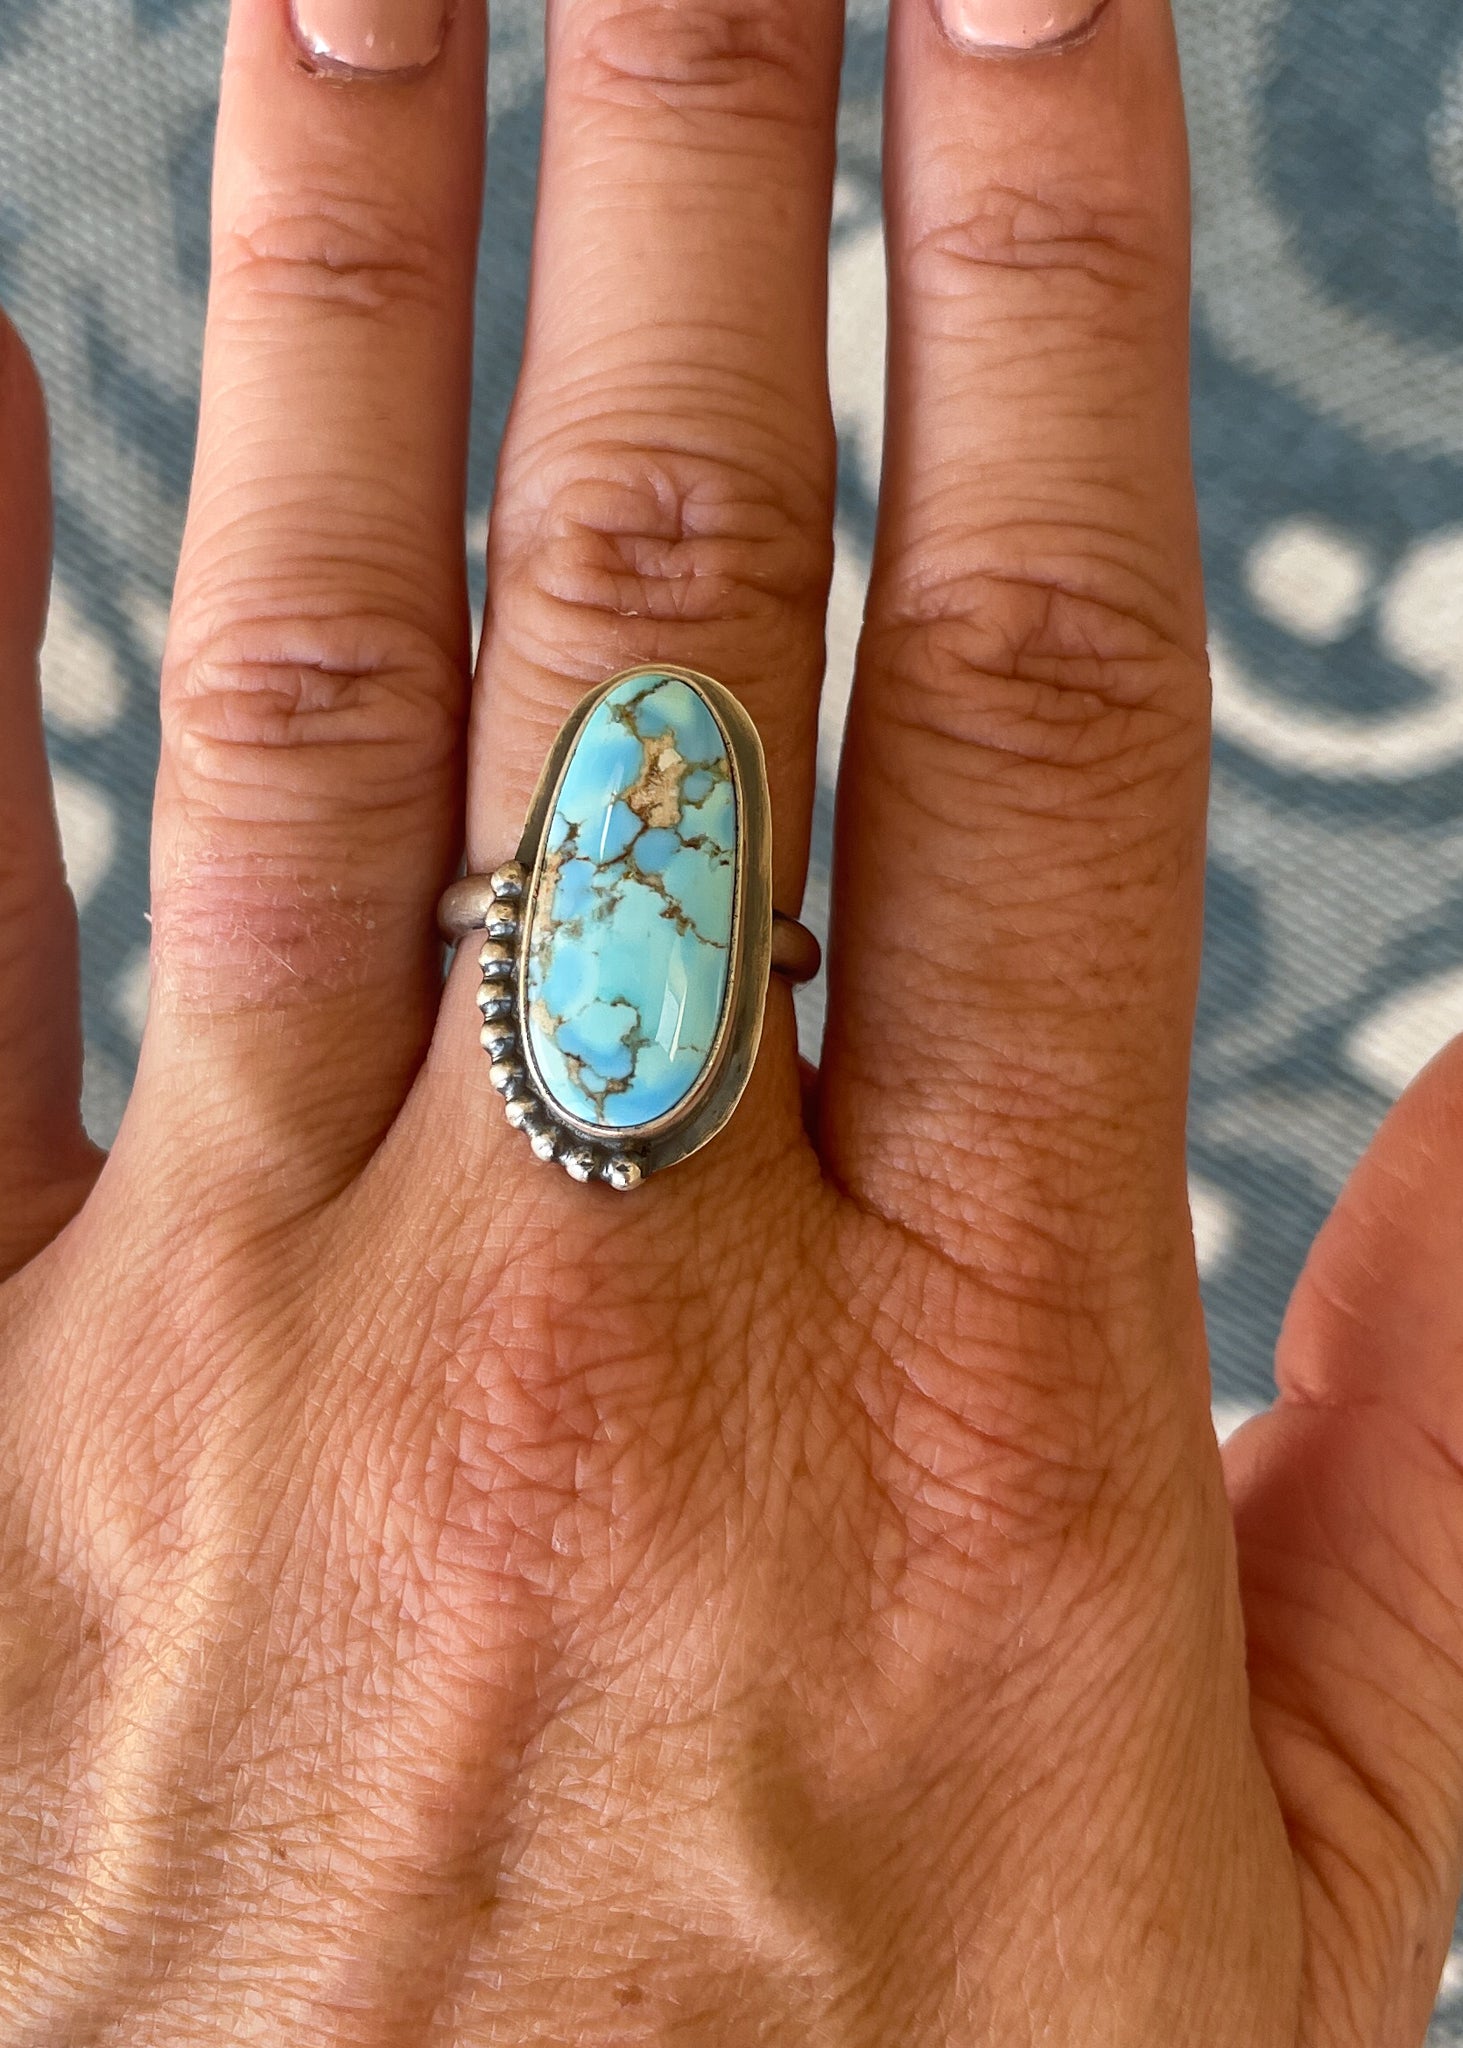 South Valley Golden Hills Turquoise Ring